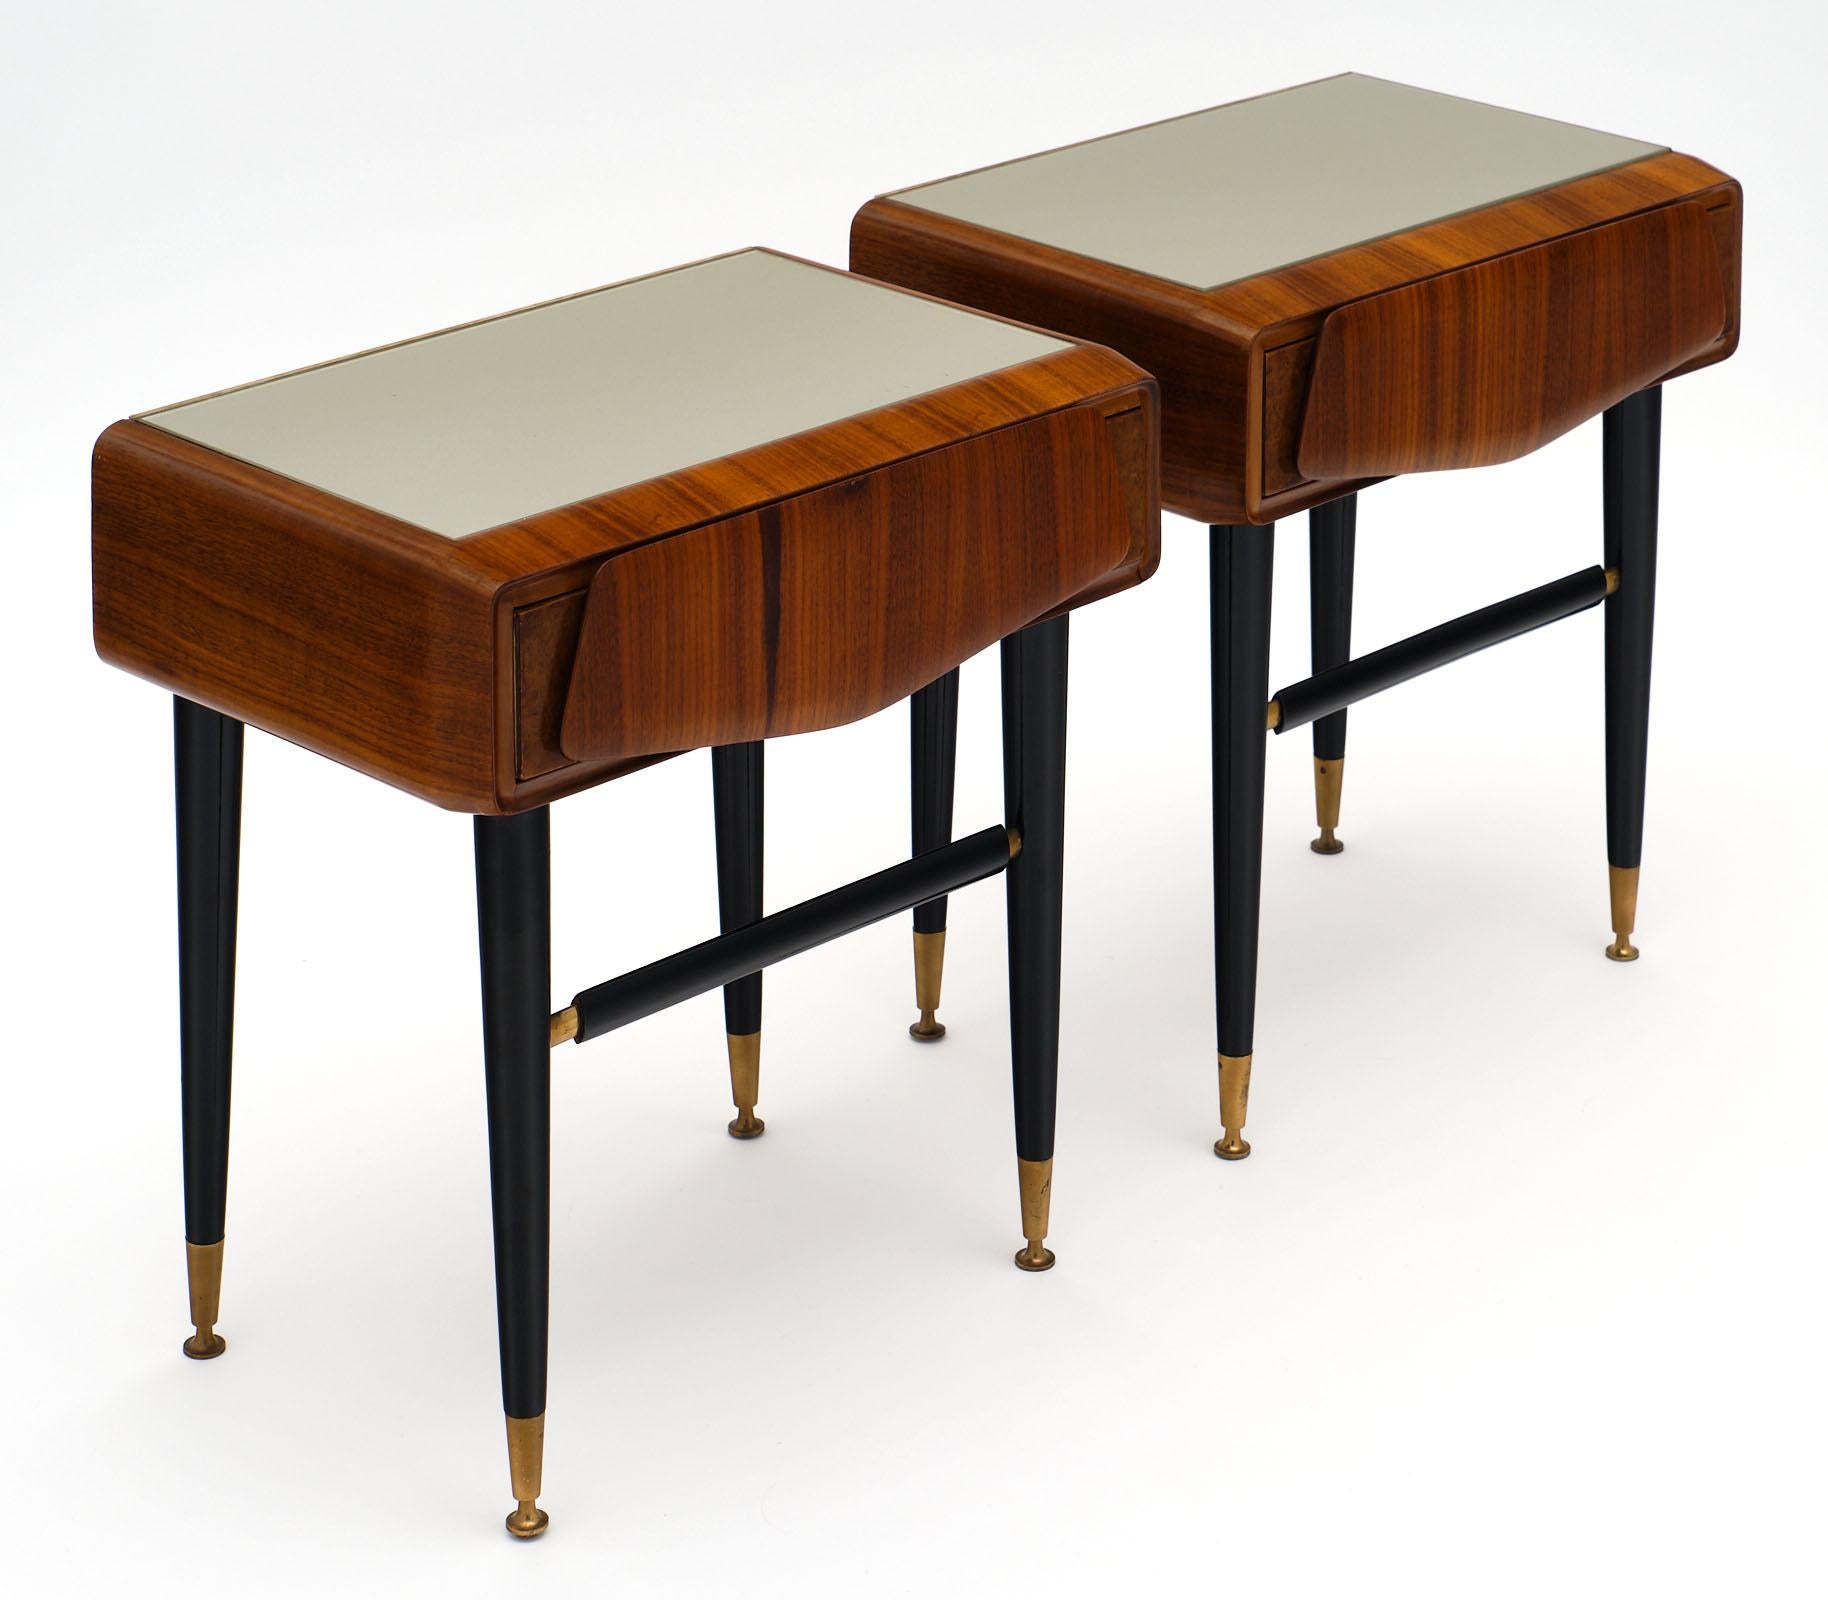 Italian midcentury side tables each featuring a drawer and a gray colored glass top. The base is ebonized with gilt brass accents. We love the sleek details and lines of this pair.